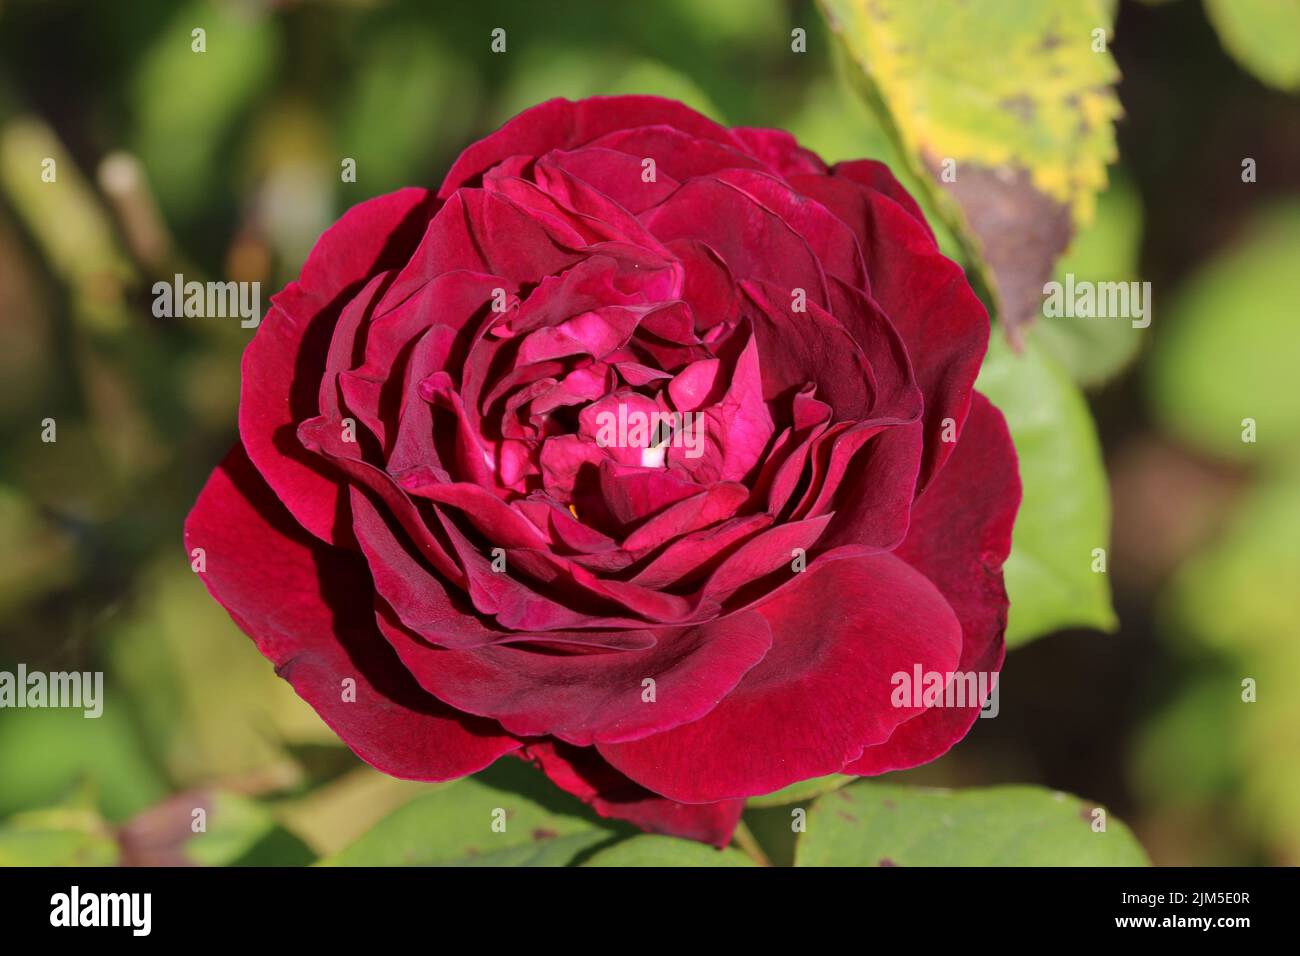 Red old climbing rose, Rosa variety Souvenir du Docteur Jamain, flower in close up with a background of blurred leaves. Stock Photo